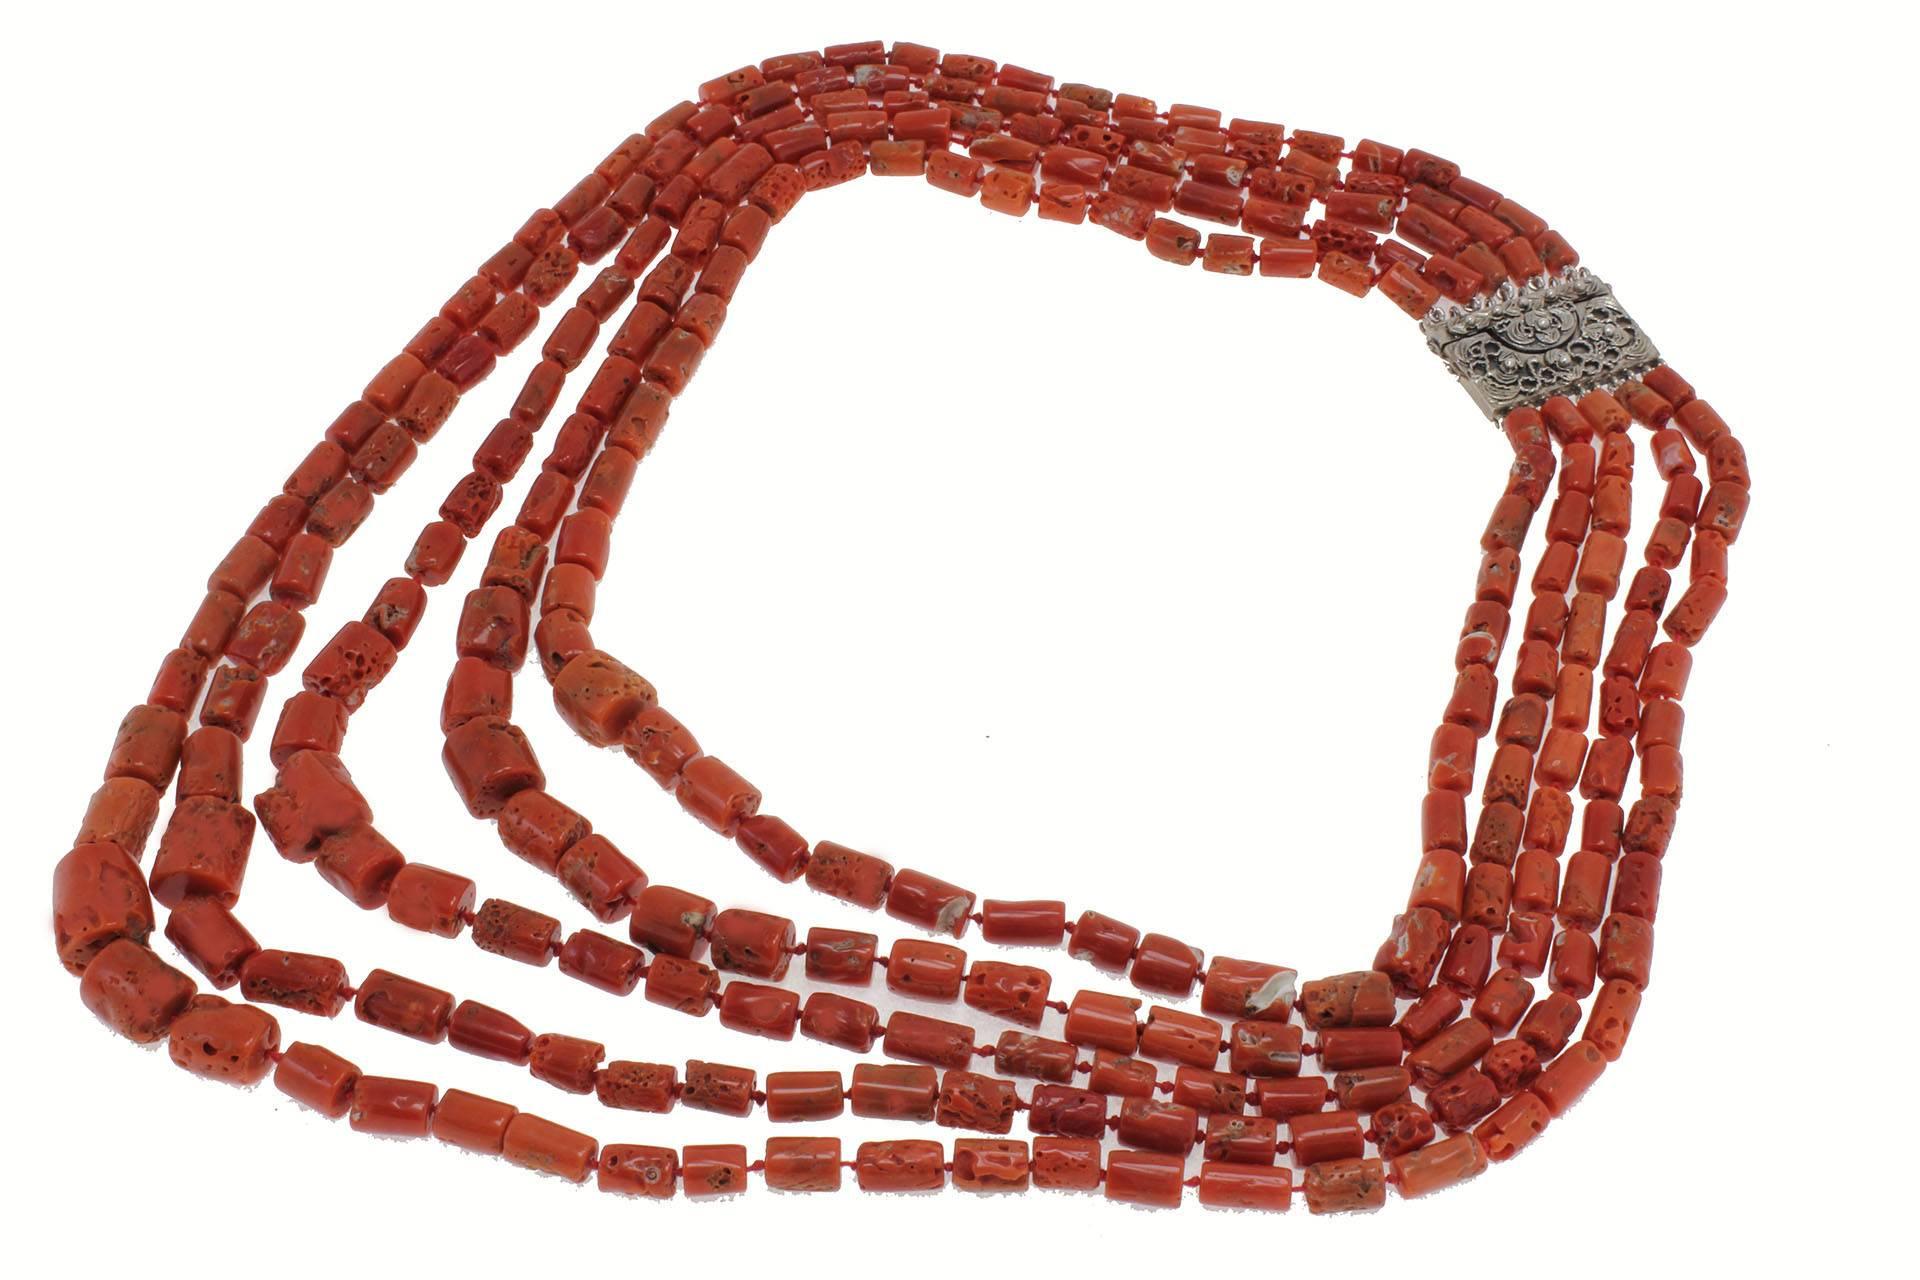 Necklace composed of 5 coral rows and a silver decorate clasp.

coral (325.90 gr)
tot.weight 353.80
r.f  uoui